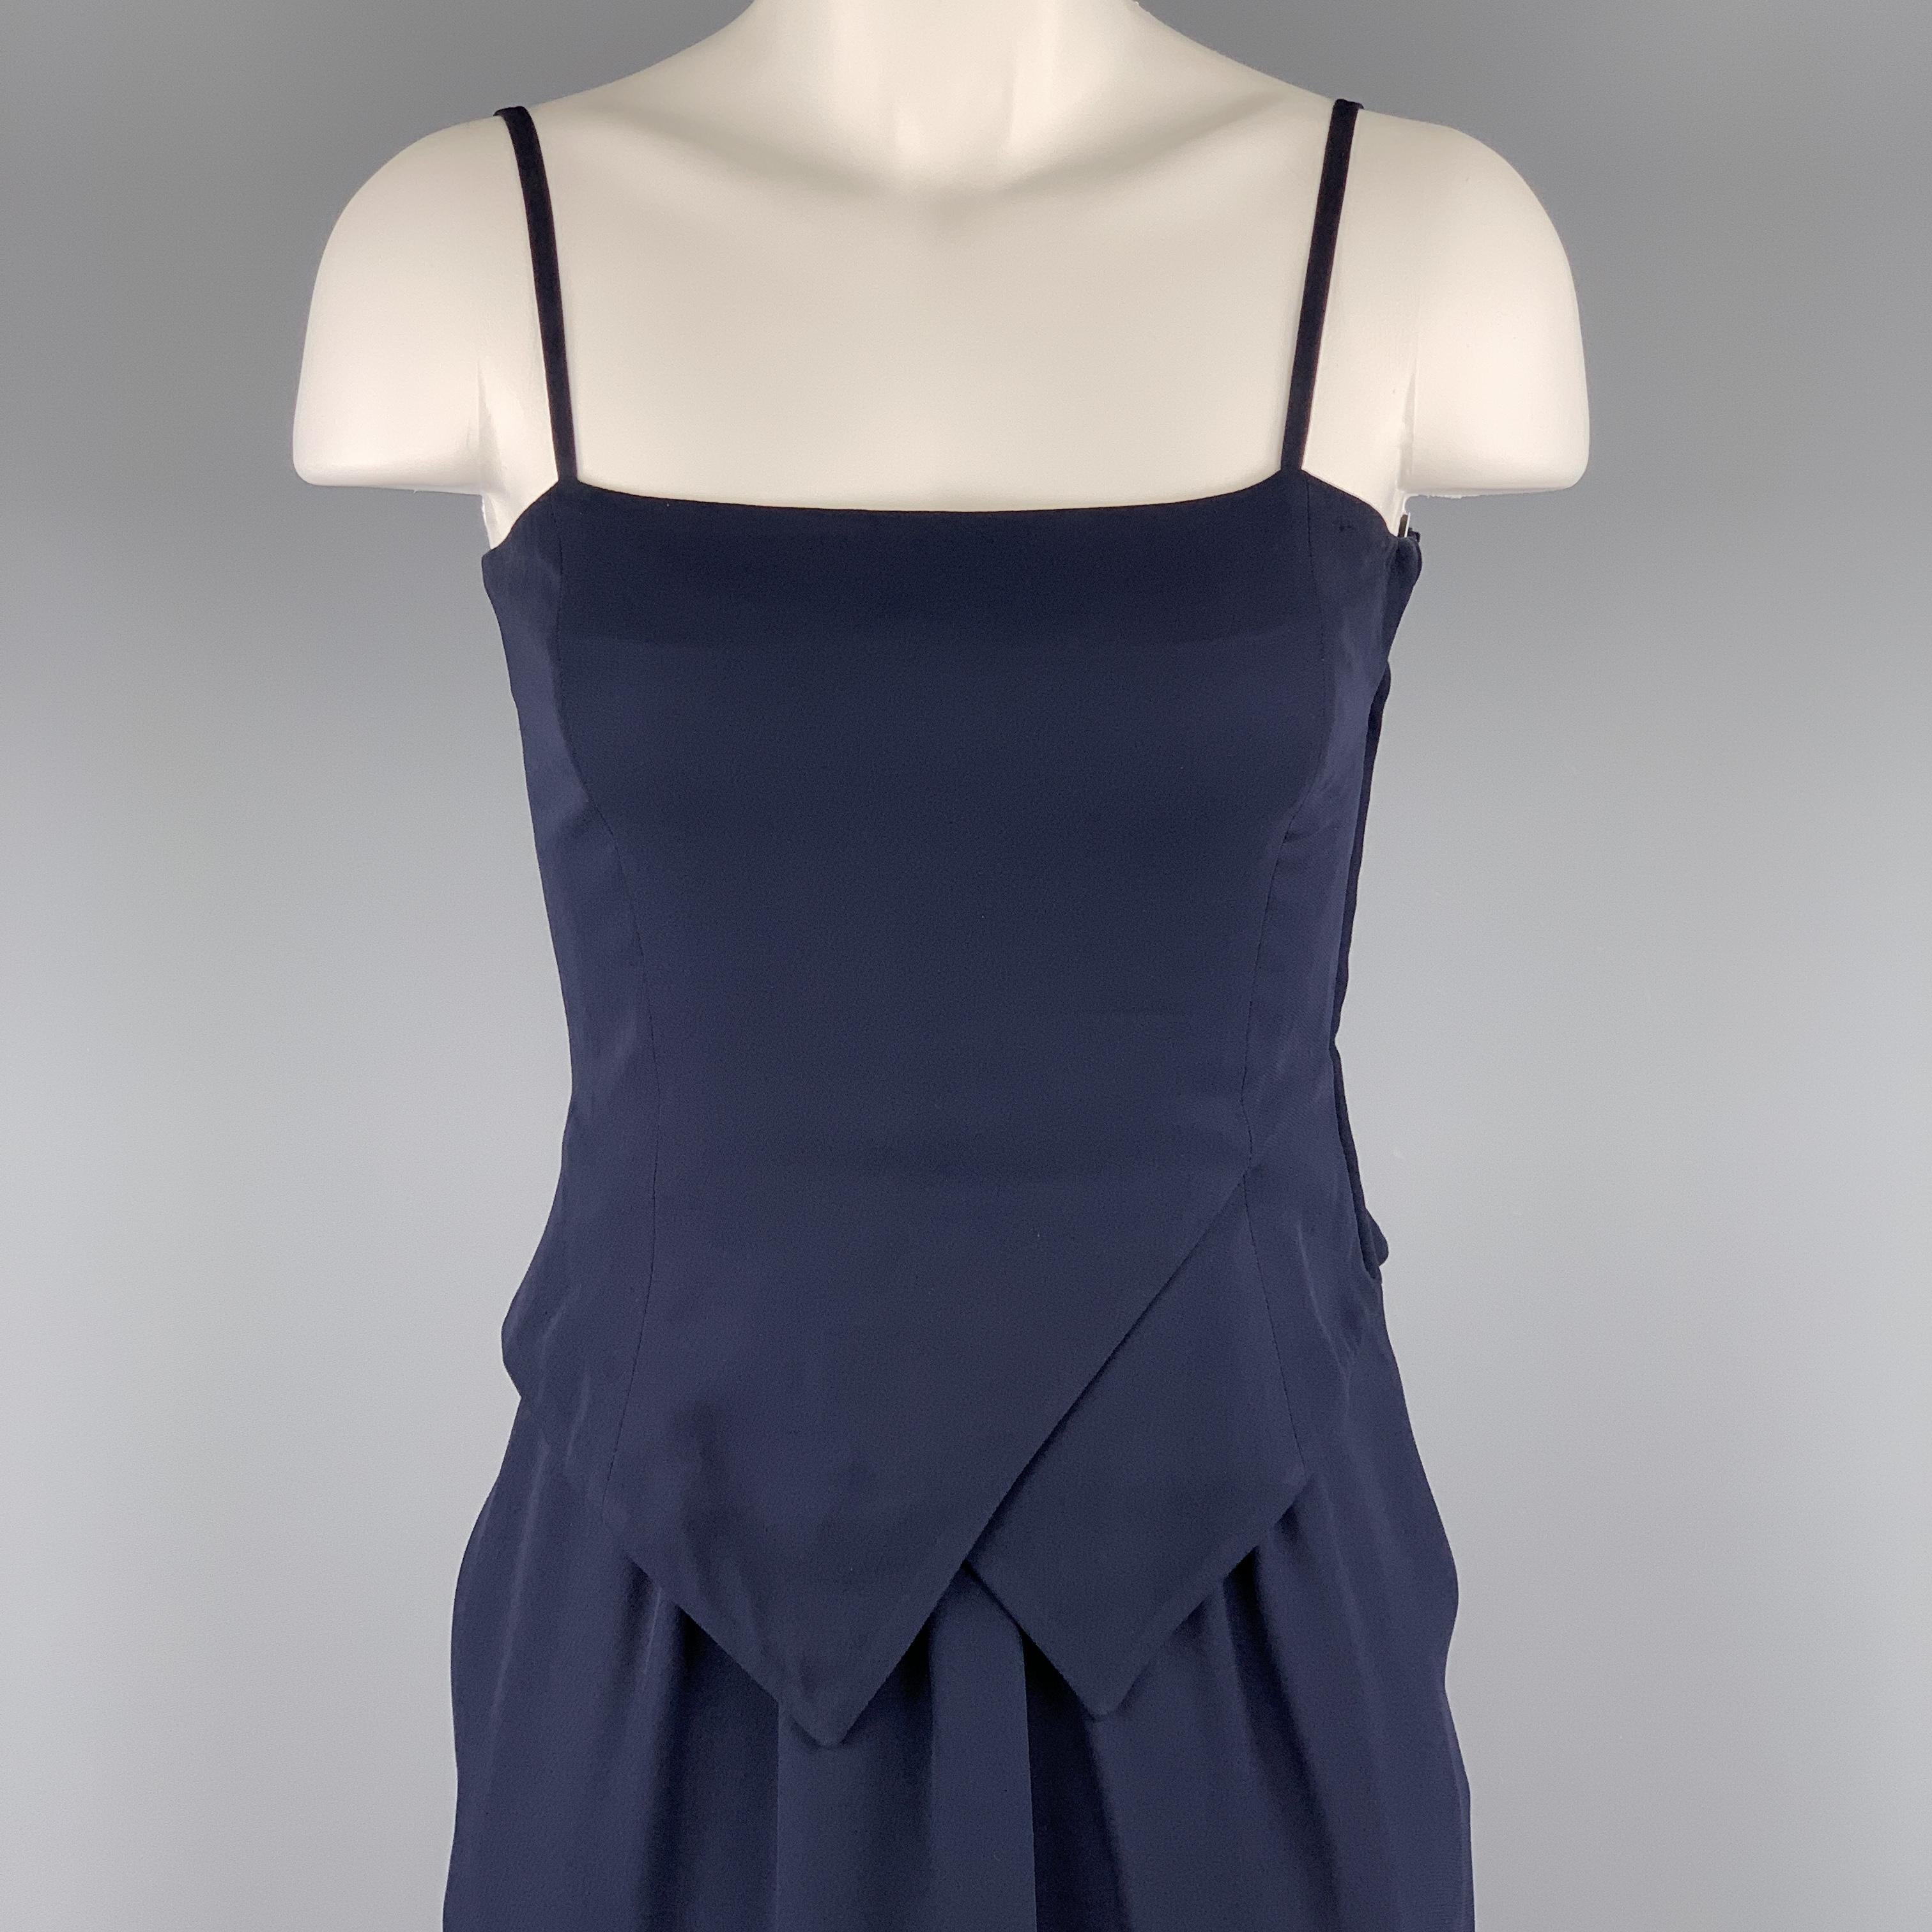 Vintage GIORGIO ARMANI cocktail dress comes in navy blue viscose with a spaghetti strap bustier bodice top, wrap point detailed waistline overlay, and pleated skirt. Made in Italy.

Excellent Pre-Owned Condition.
Marked: 38/4

Measurements:

Bust: